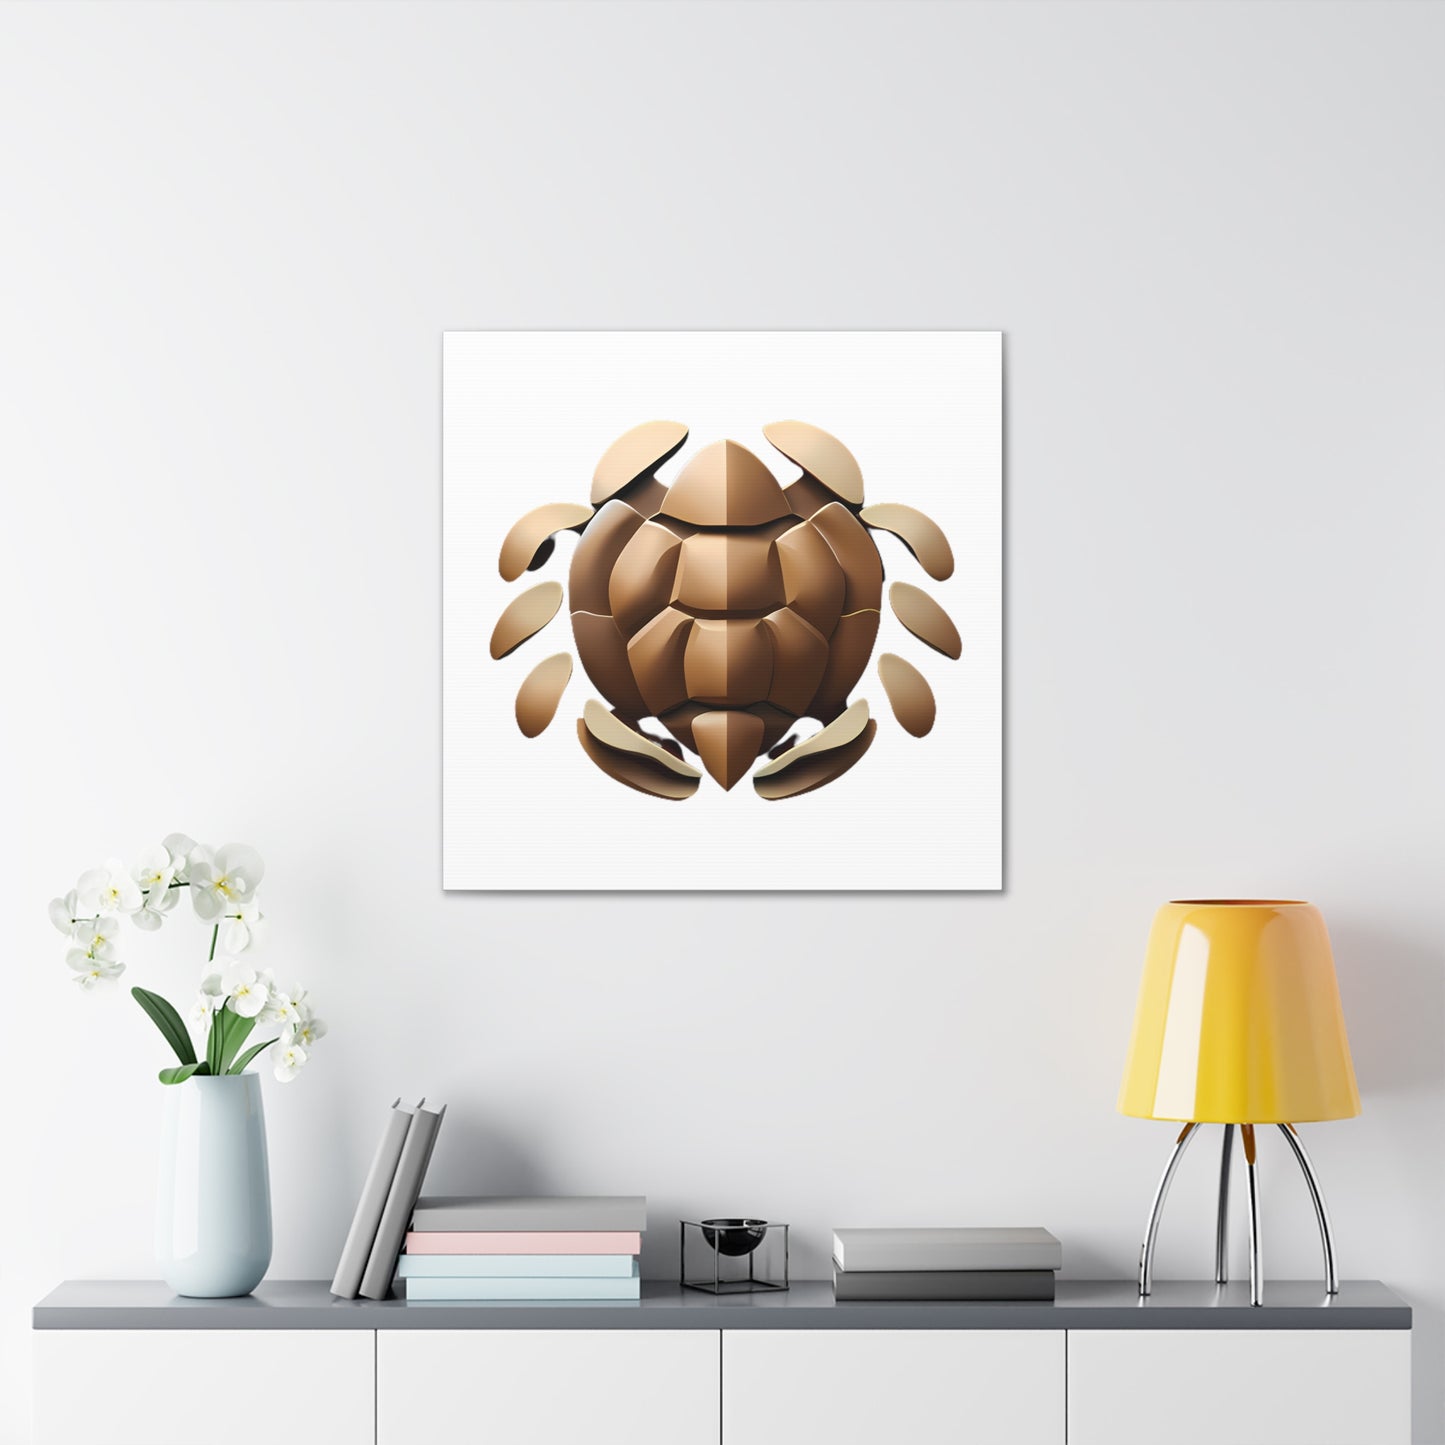 Unique 3D Canvas Wildlife Wall Art Gallery Wraps - Turtle-Shell Wall Decor Living Room Art- Colorful